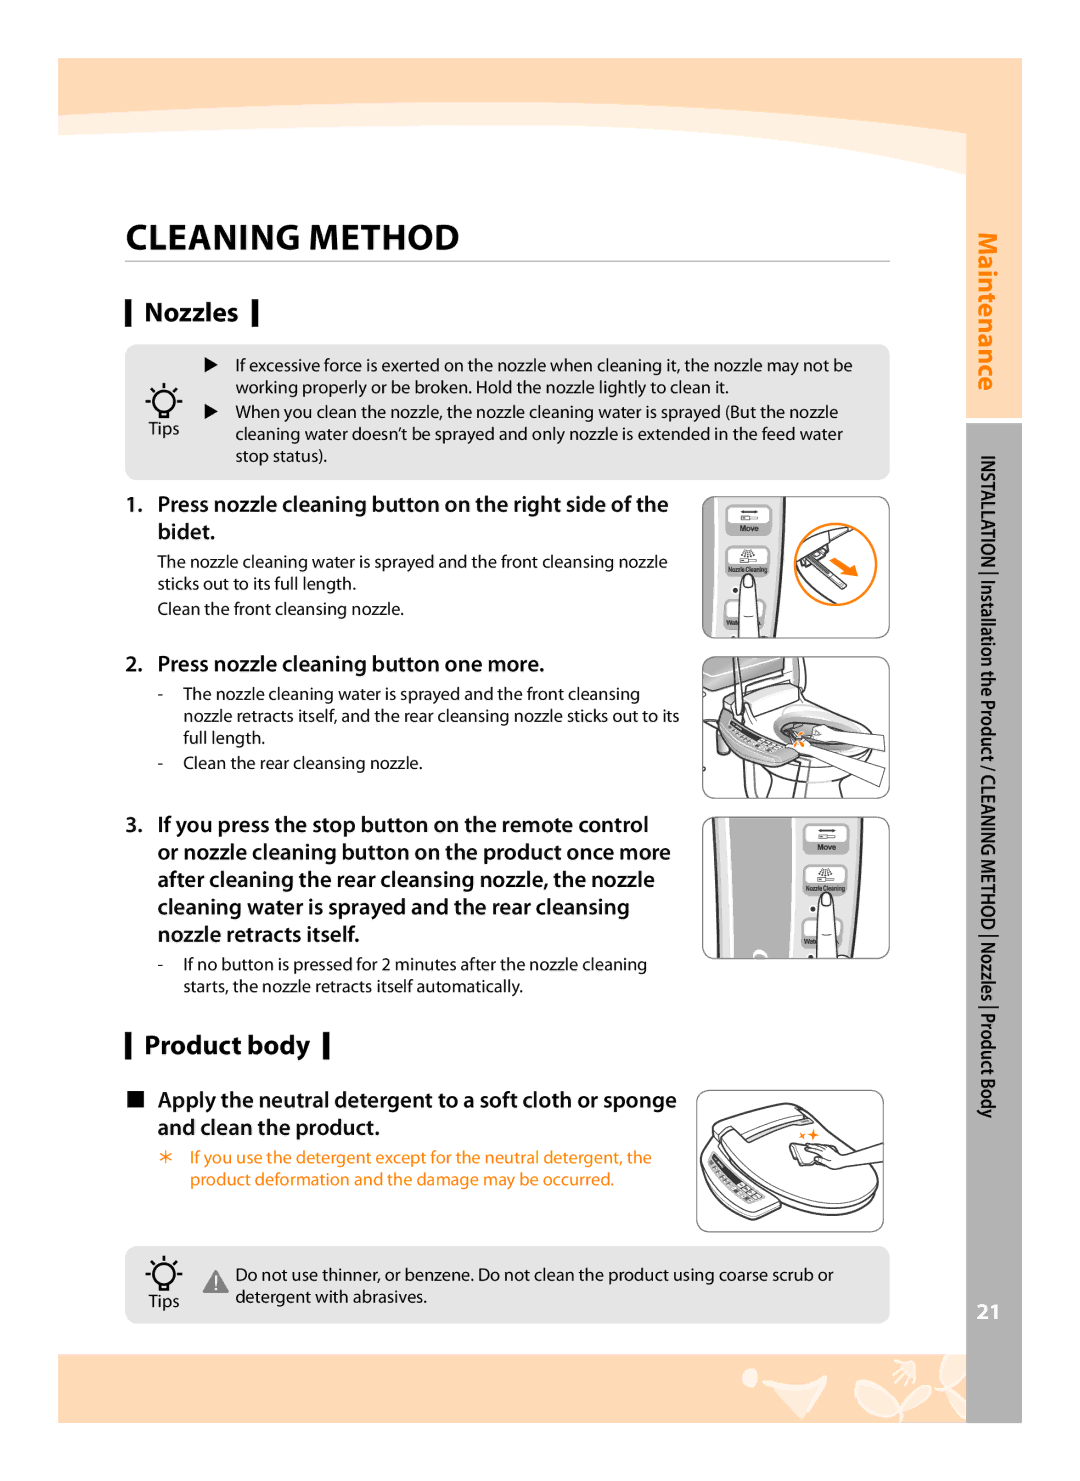 Coway BA07-R, BA07-E Cleaning Method, Nozzles, Product body, Press nozzle cleaning button on the right side of the bidet 